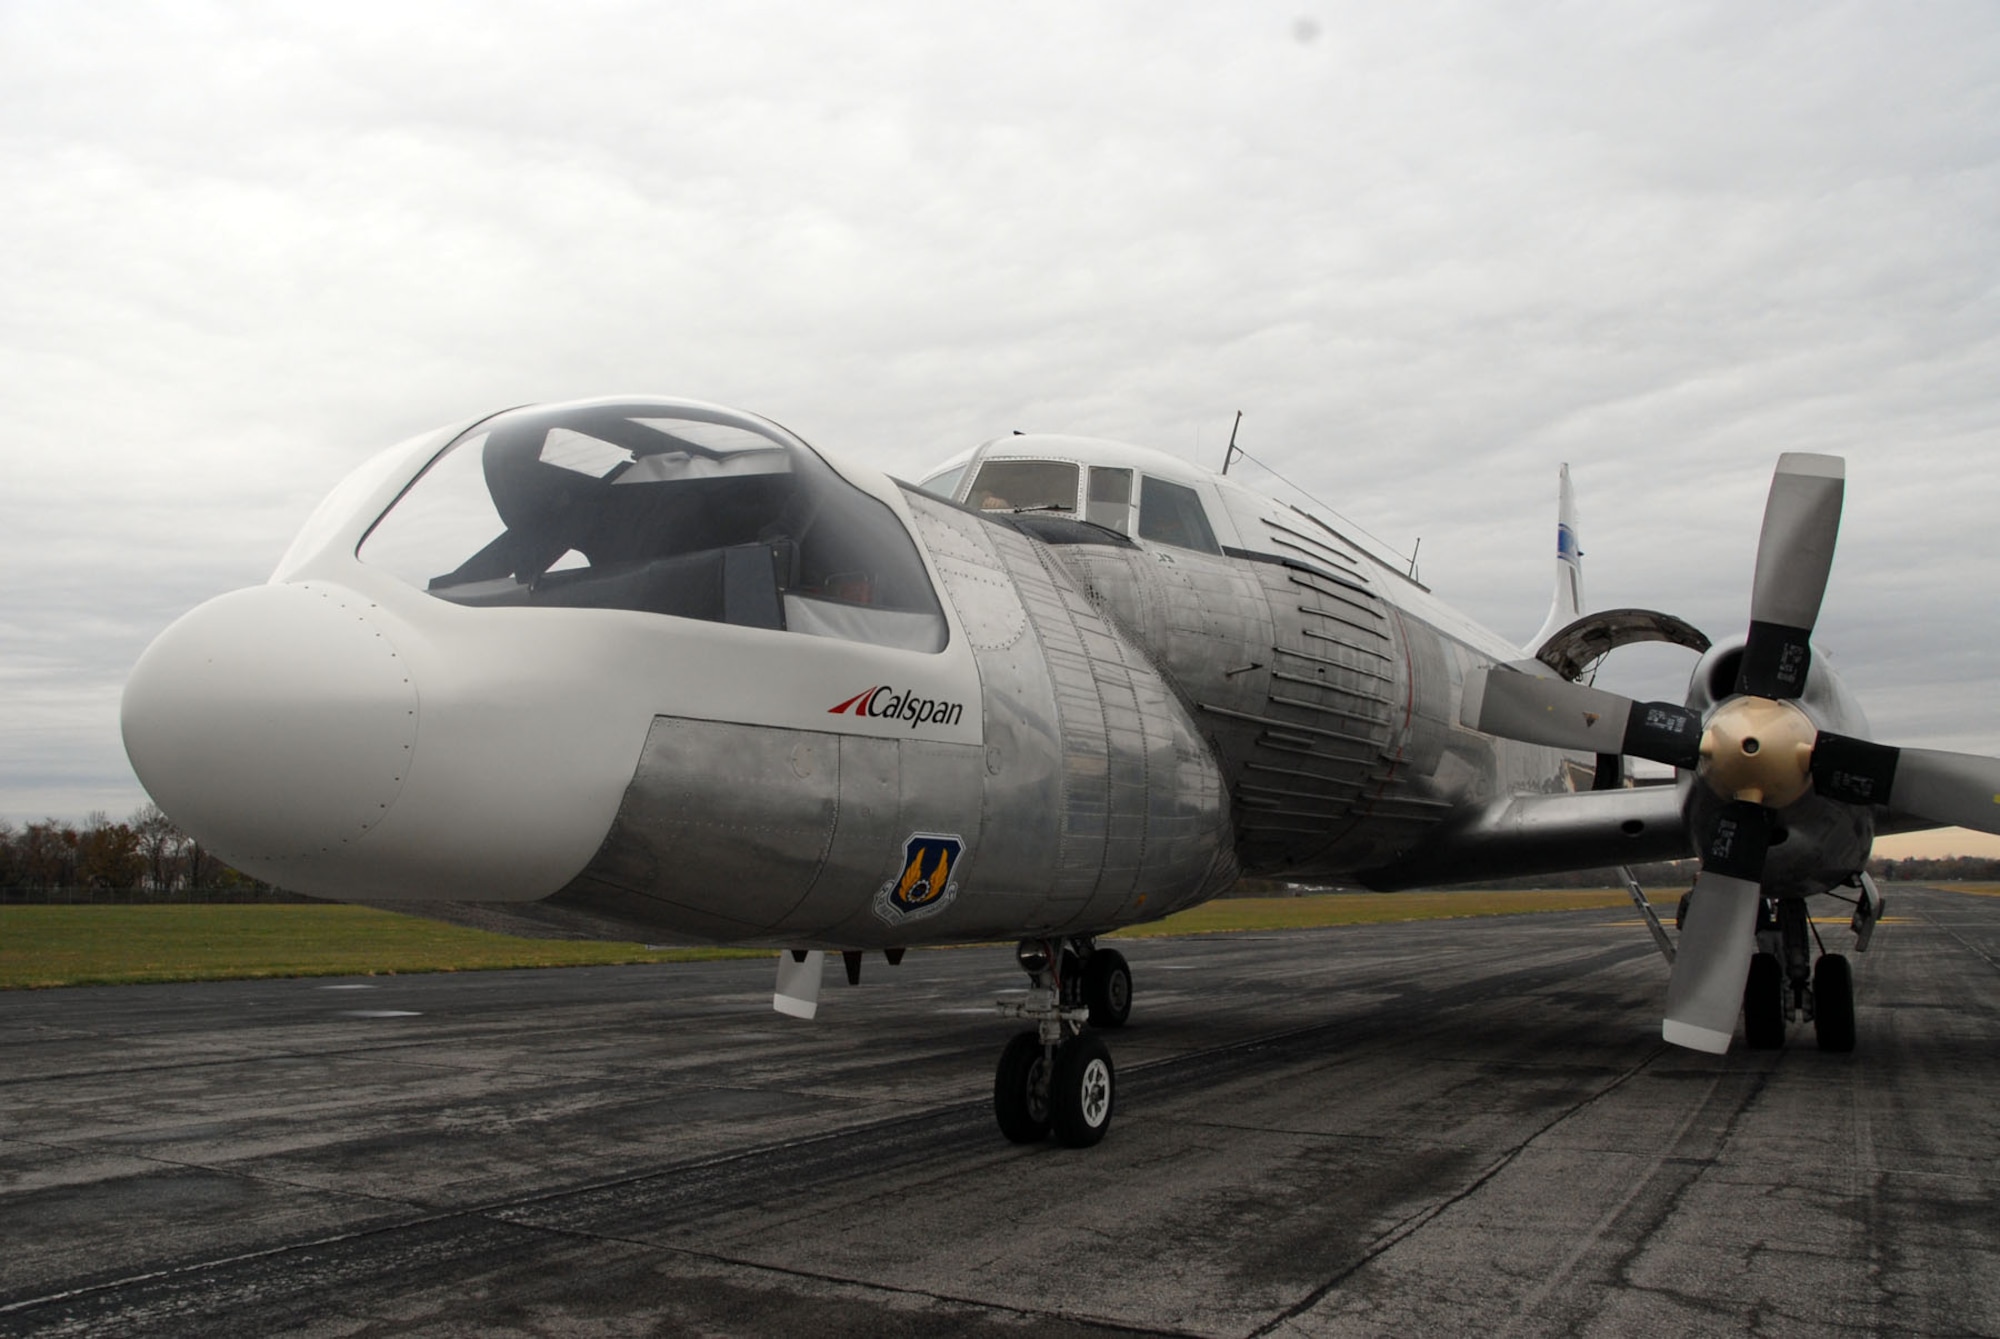 DAYTON, Ohio - The Convair NC-131H Total In-Flight Simulator (TIFS), a very unique aircraft created to perform research for the U.S. Air Force, just after landing on the back field of the National Museum of the U.S. Air Force on Nov. 7, 2008. (U.S. Air Force photo)